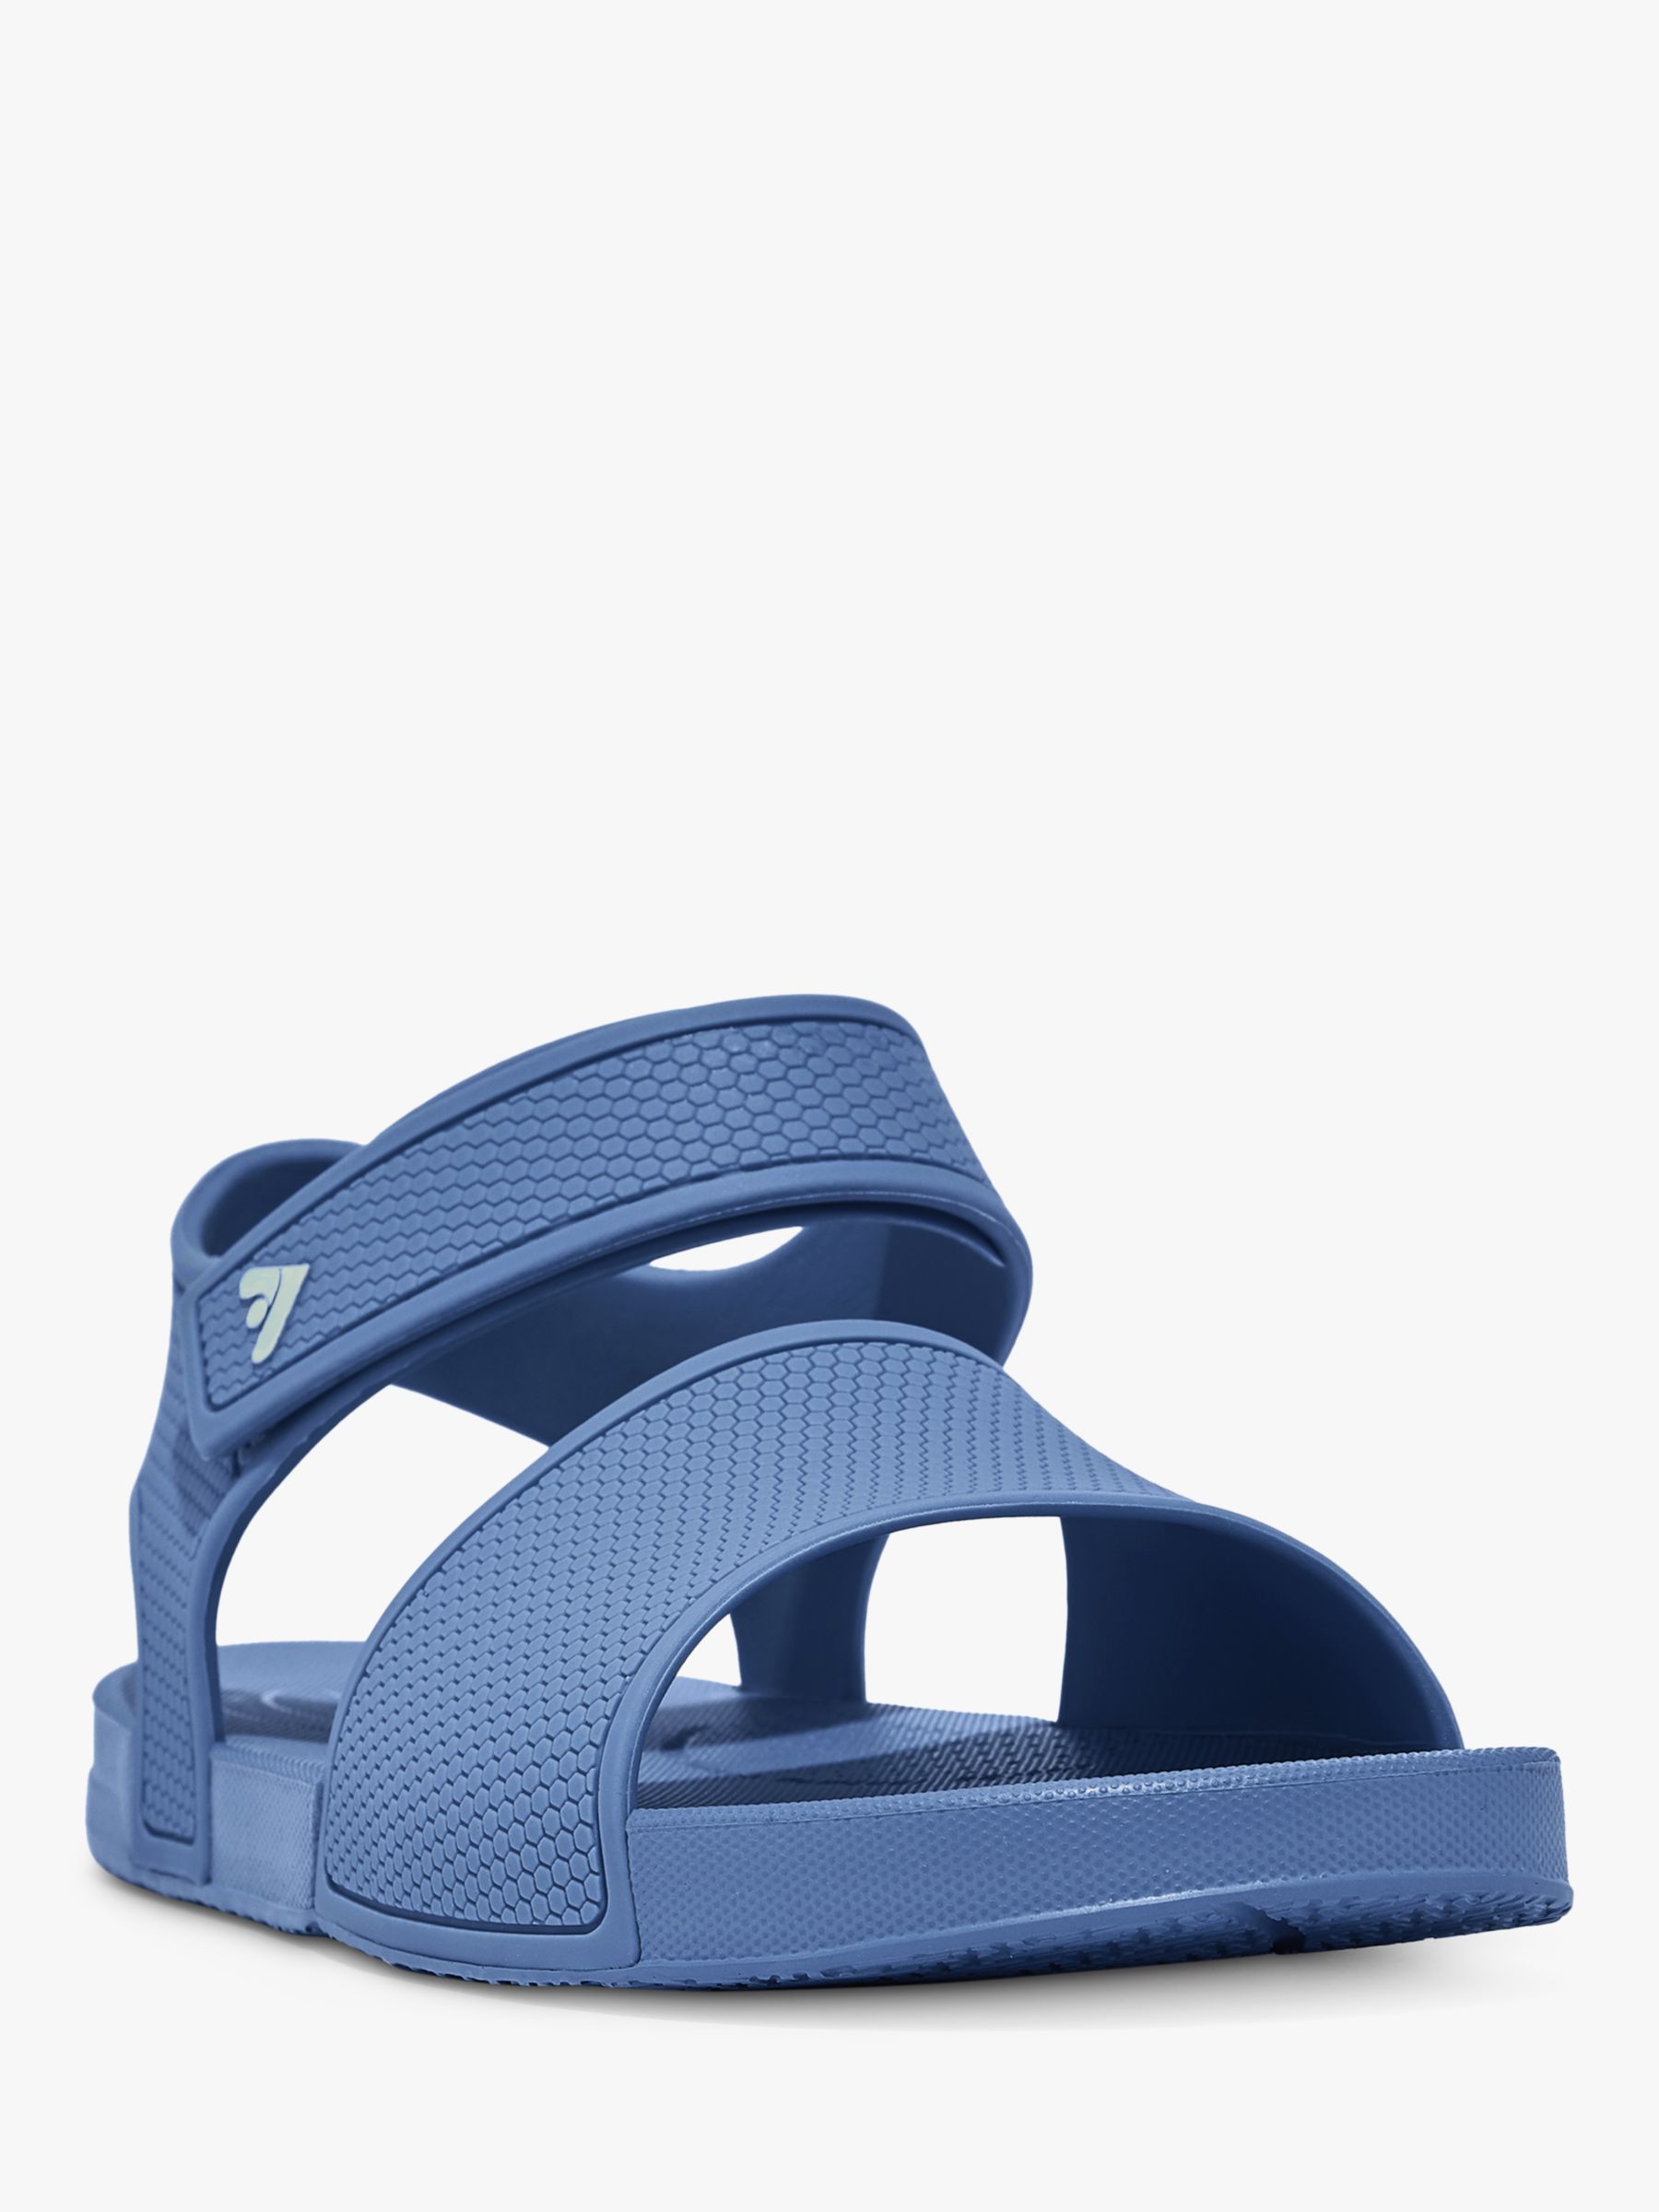 Buy FitFlop Kids' Iqushion Backstrap Sandals Online at johnlewis.com